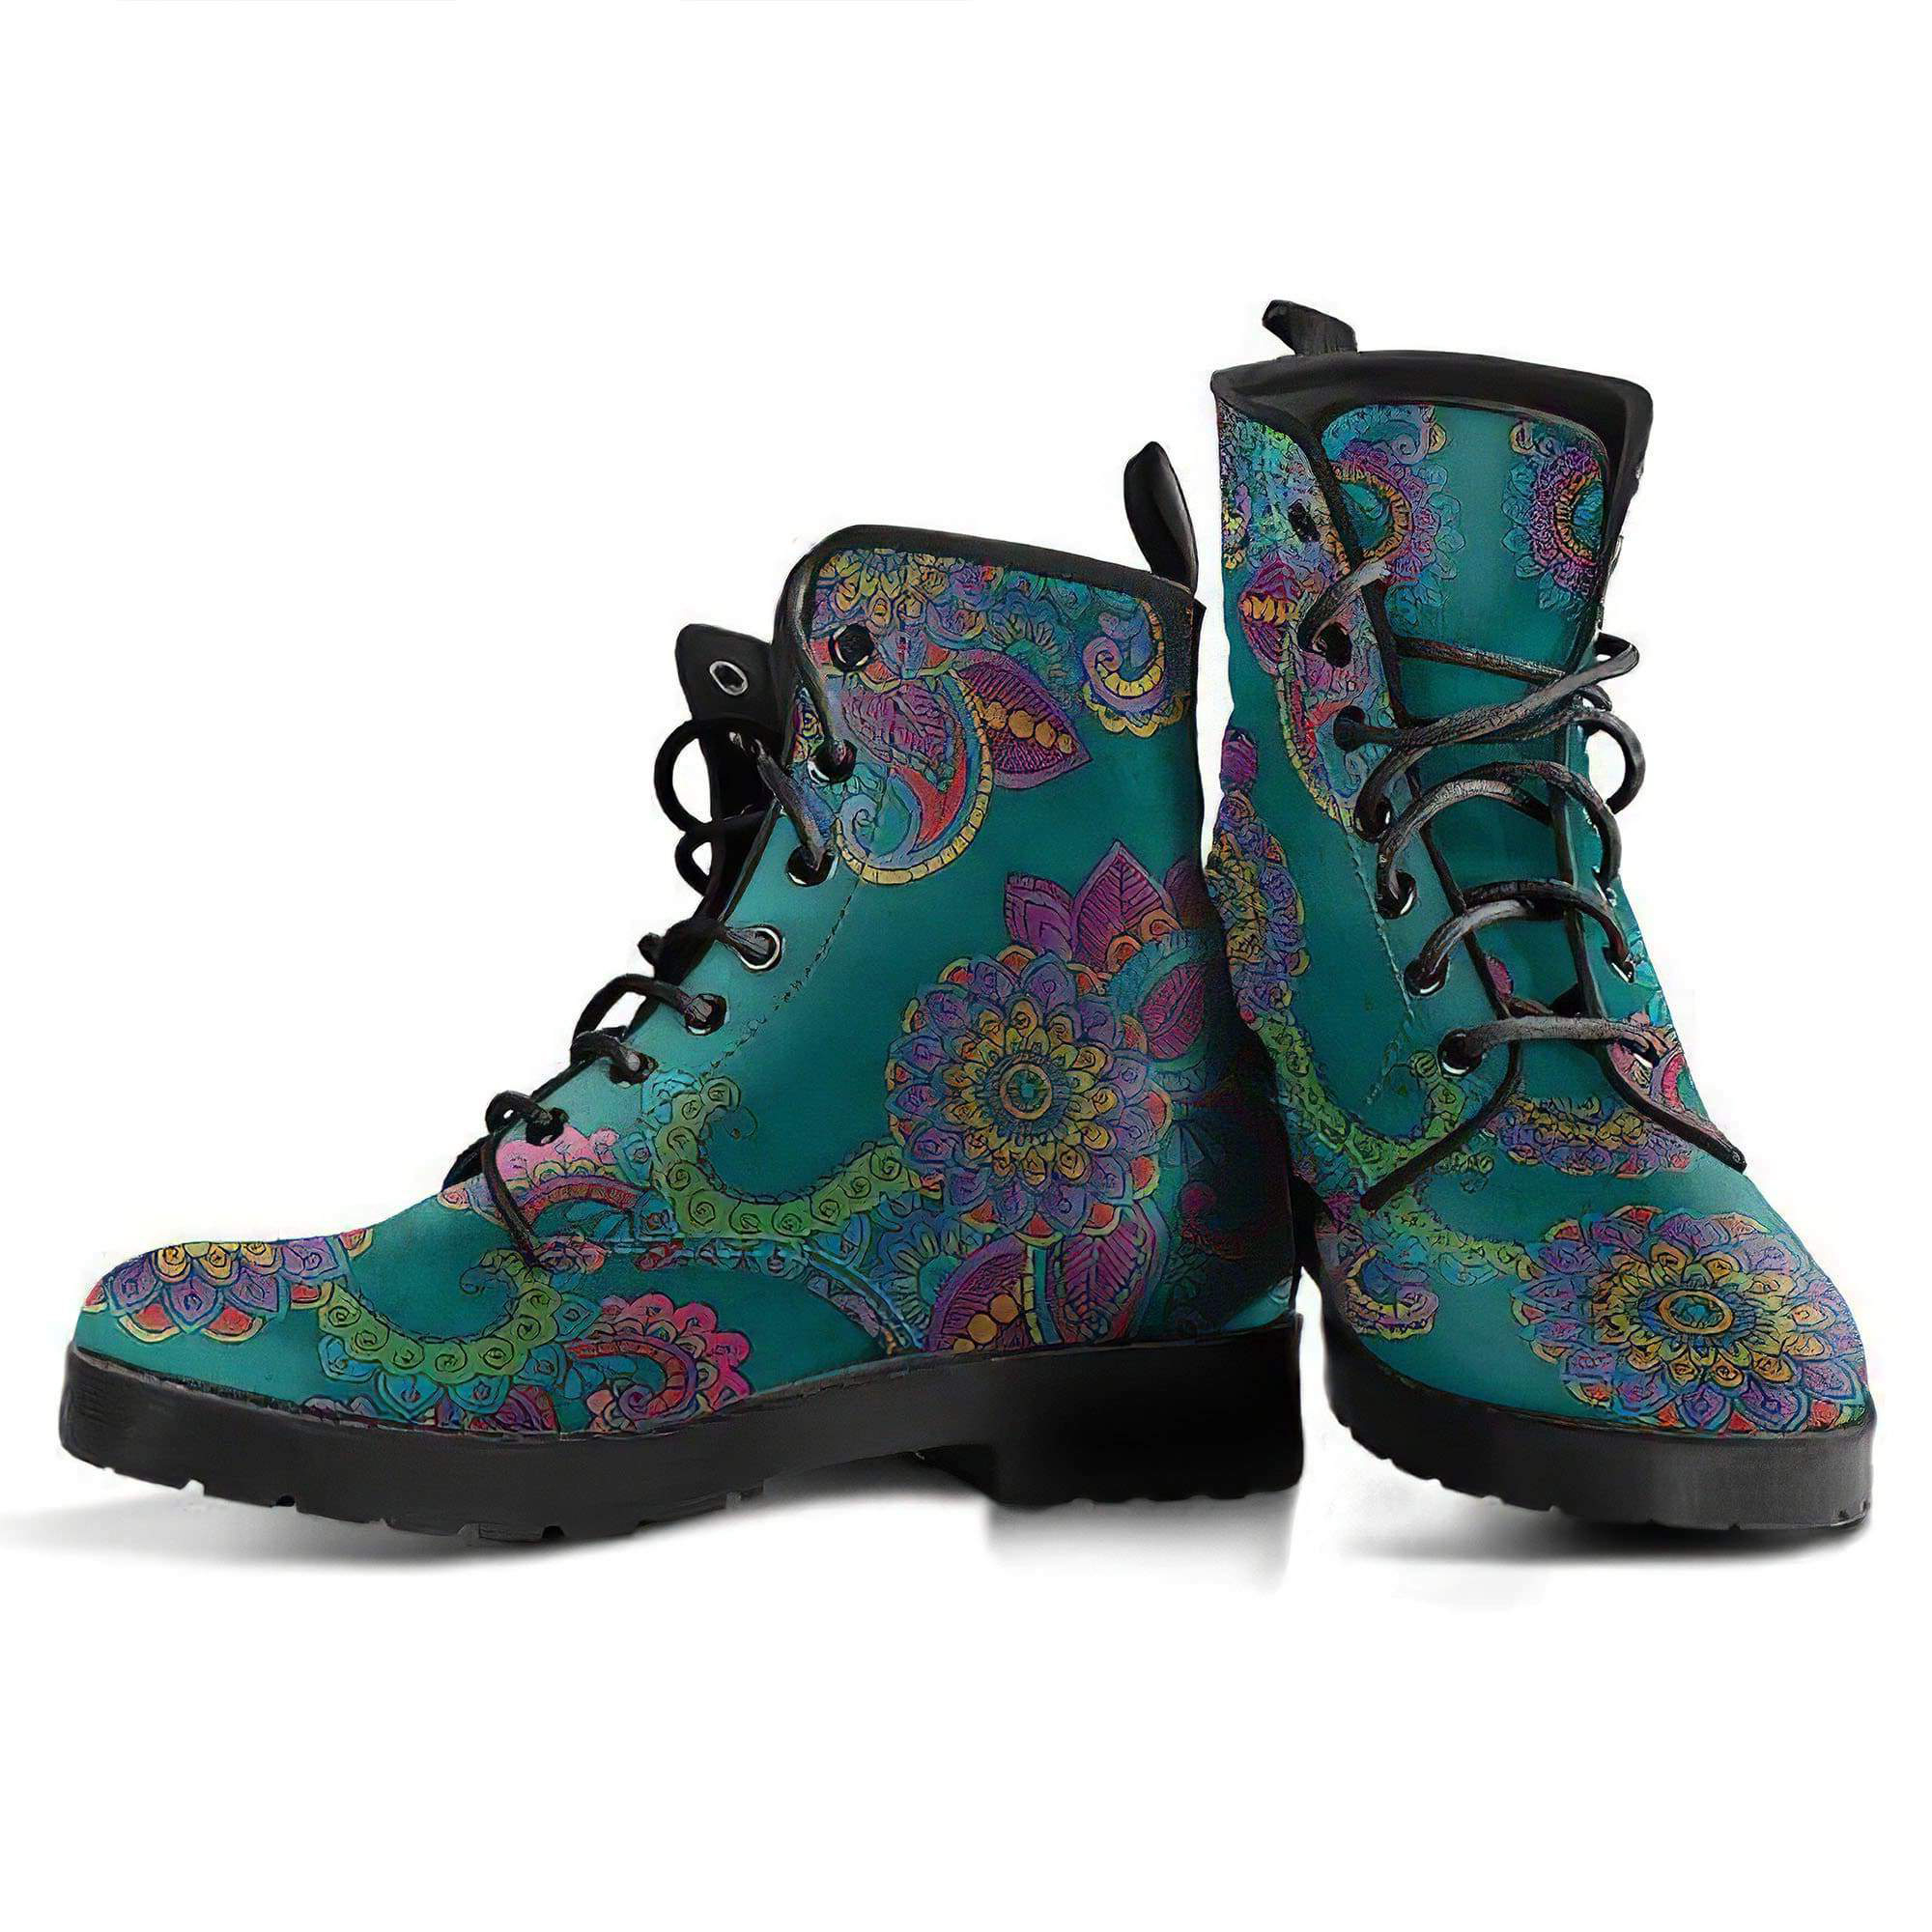 turqouise-paisley-mandala-handcrafted-boots-women-s-leather-boots-12051970457661.jpg